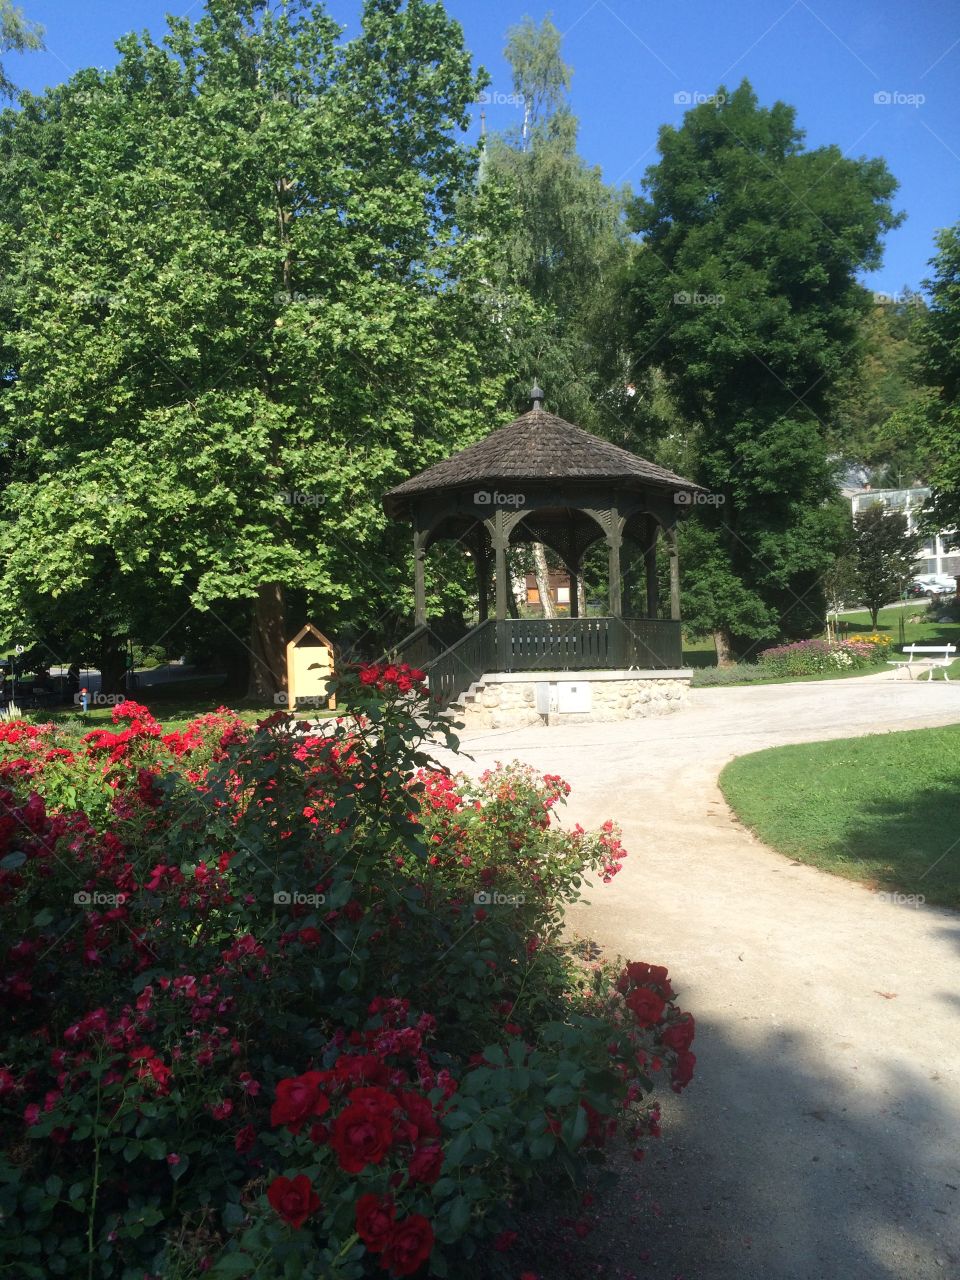 Bandstand in Lake Bled gardens 